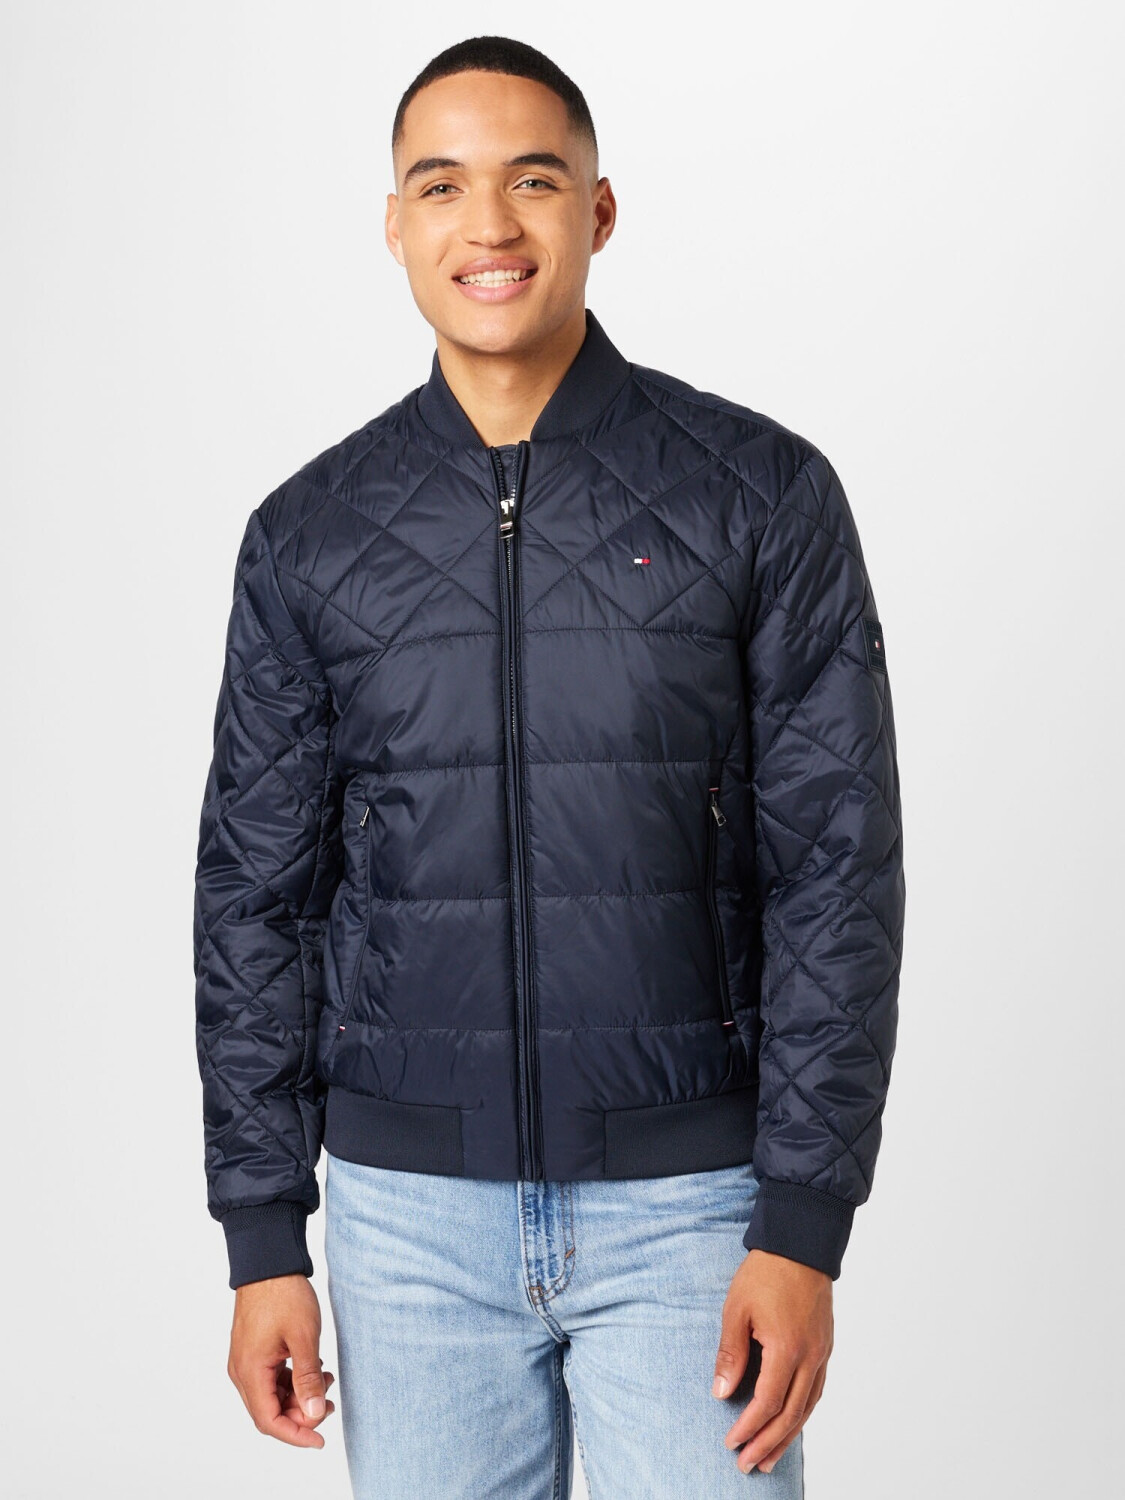 Tommy Hilfiger Packable Recycled Padded 98,48 sky € Jacket (MW0MW31633) desert bei | Bomber ab Preisvergleich